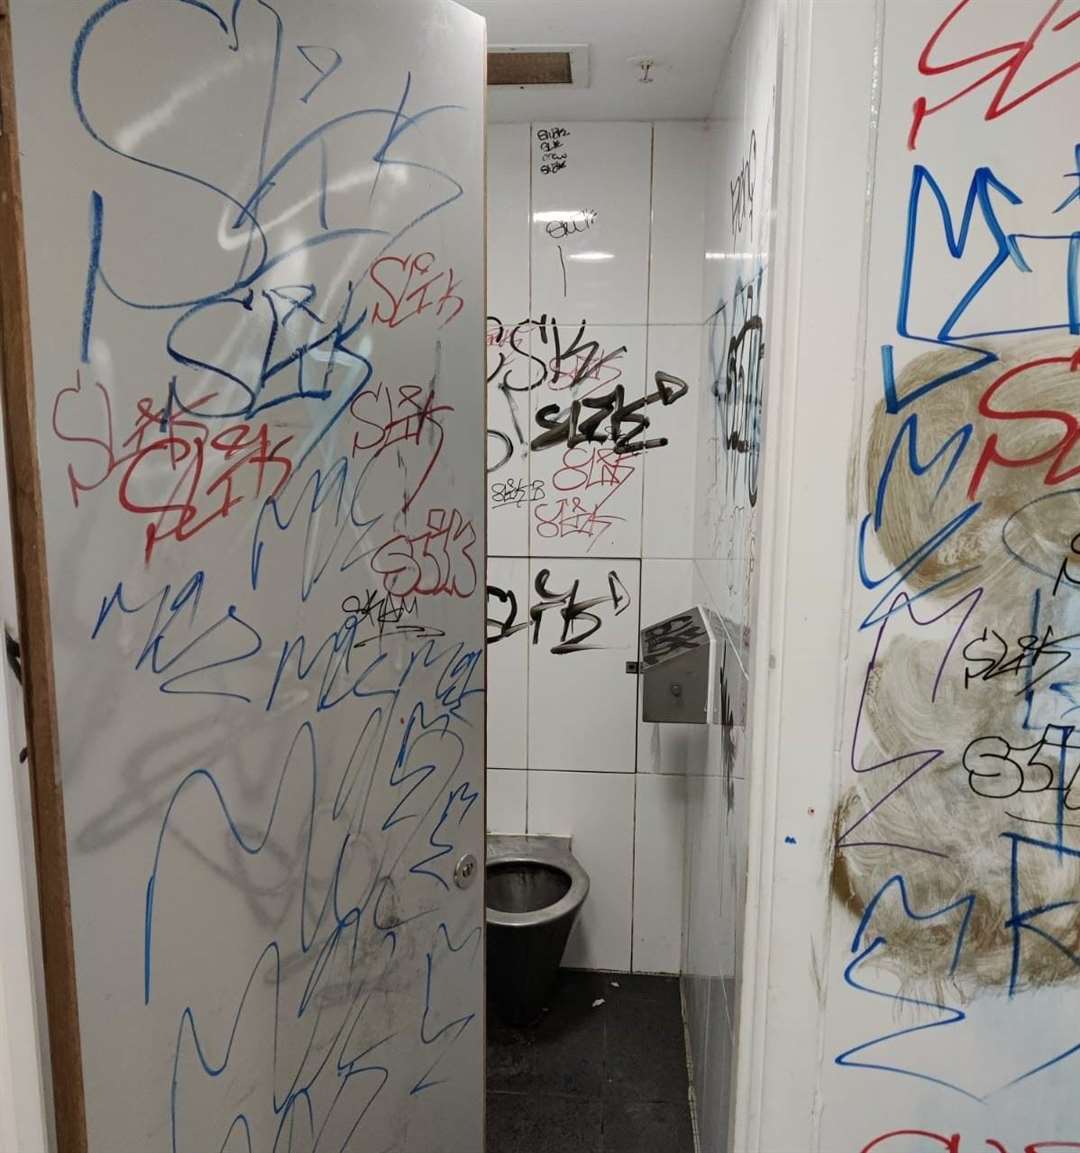 Folkestone and Hythe District Council is offering a £500 cash reward for anyone with information which helps track down who vandalised the public toilets